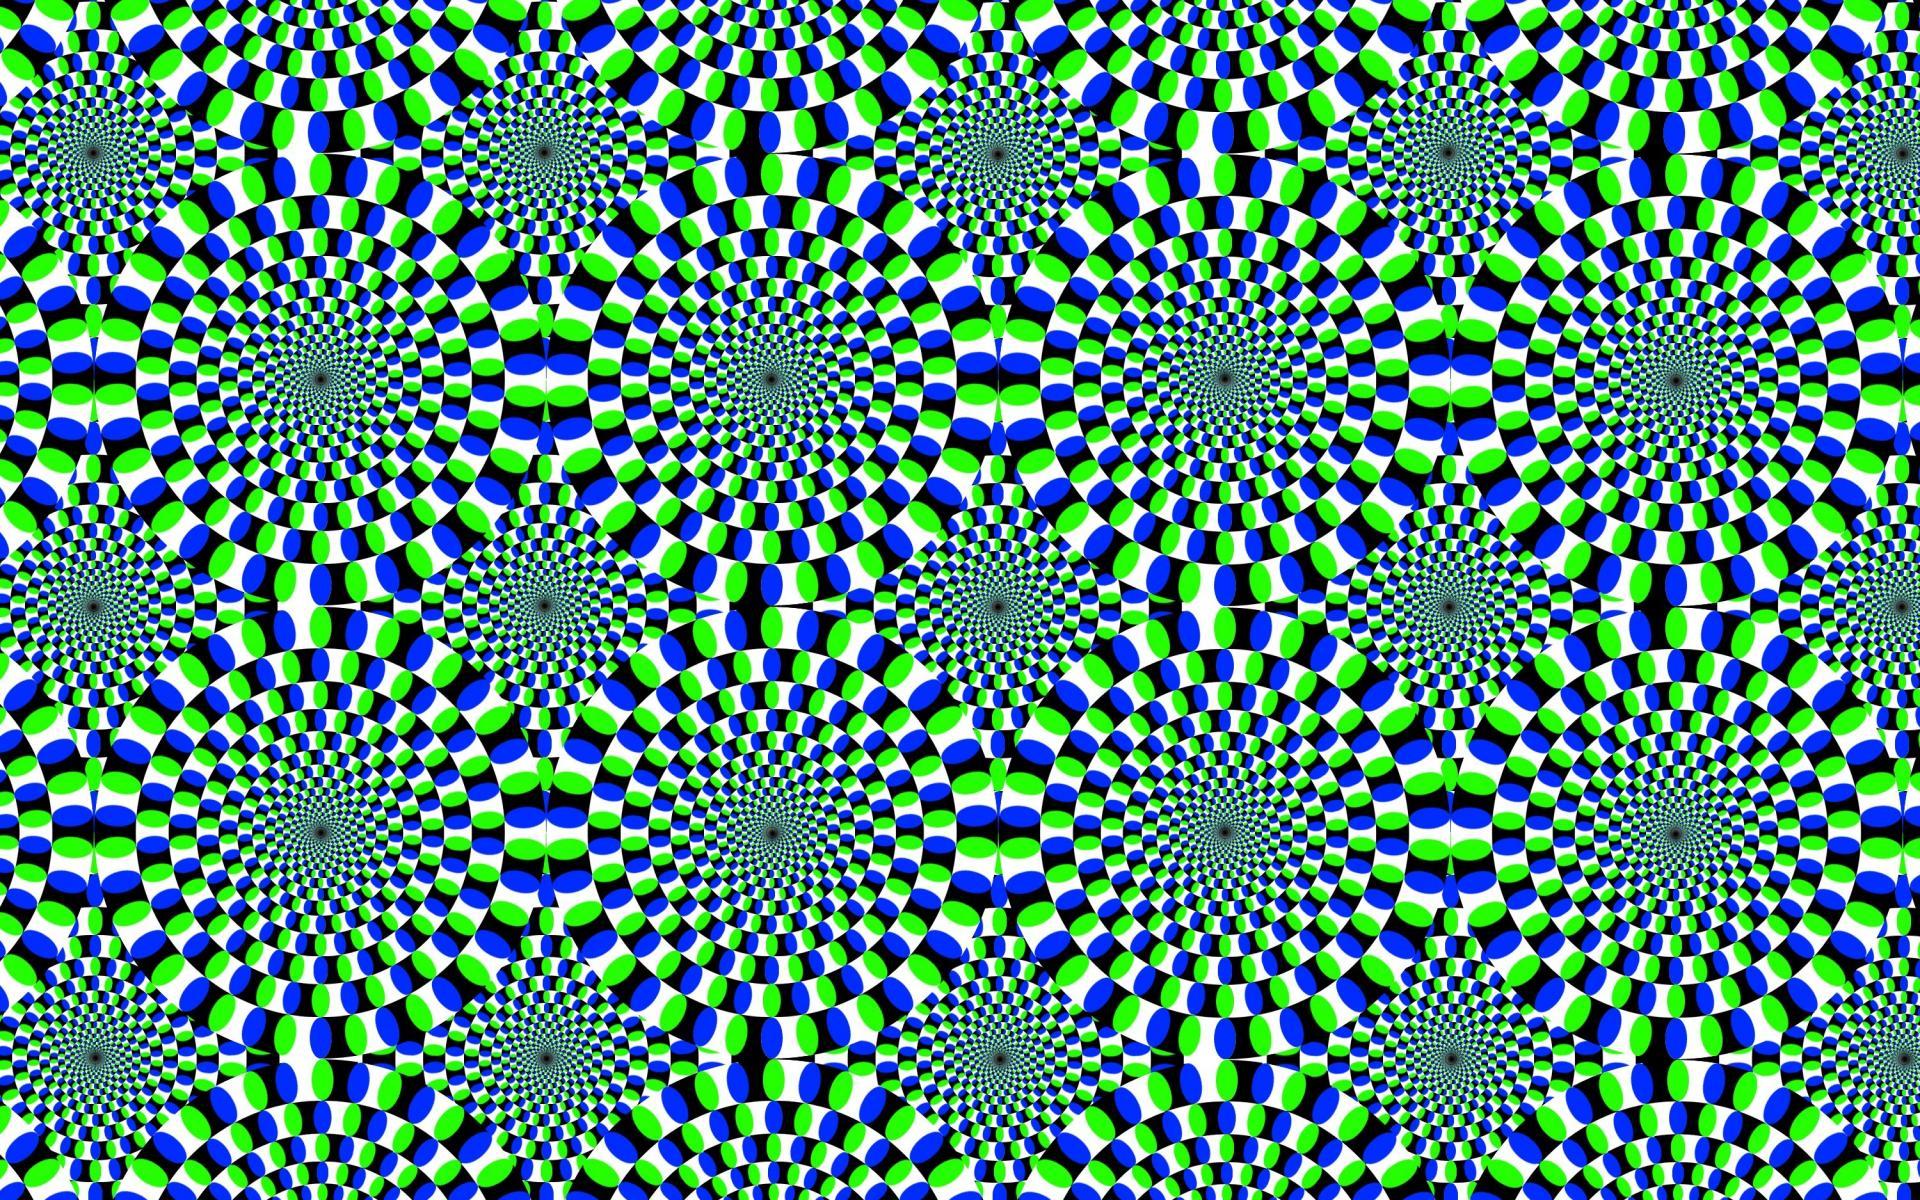 Optical Illusions Laptop Wallpapers - Top Free Optical Illusions Laptop ...